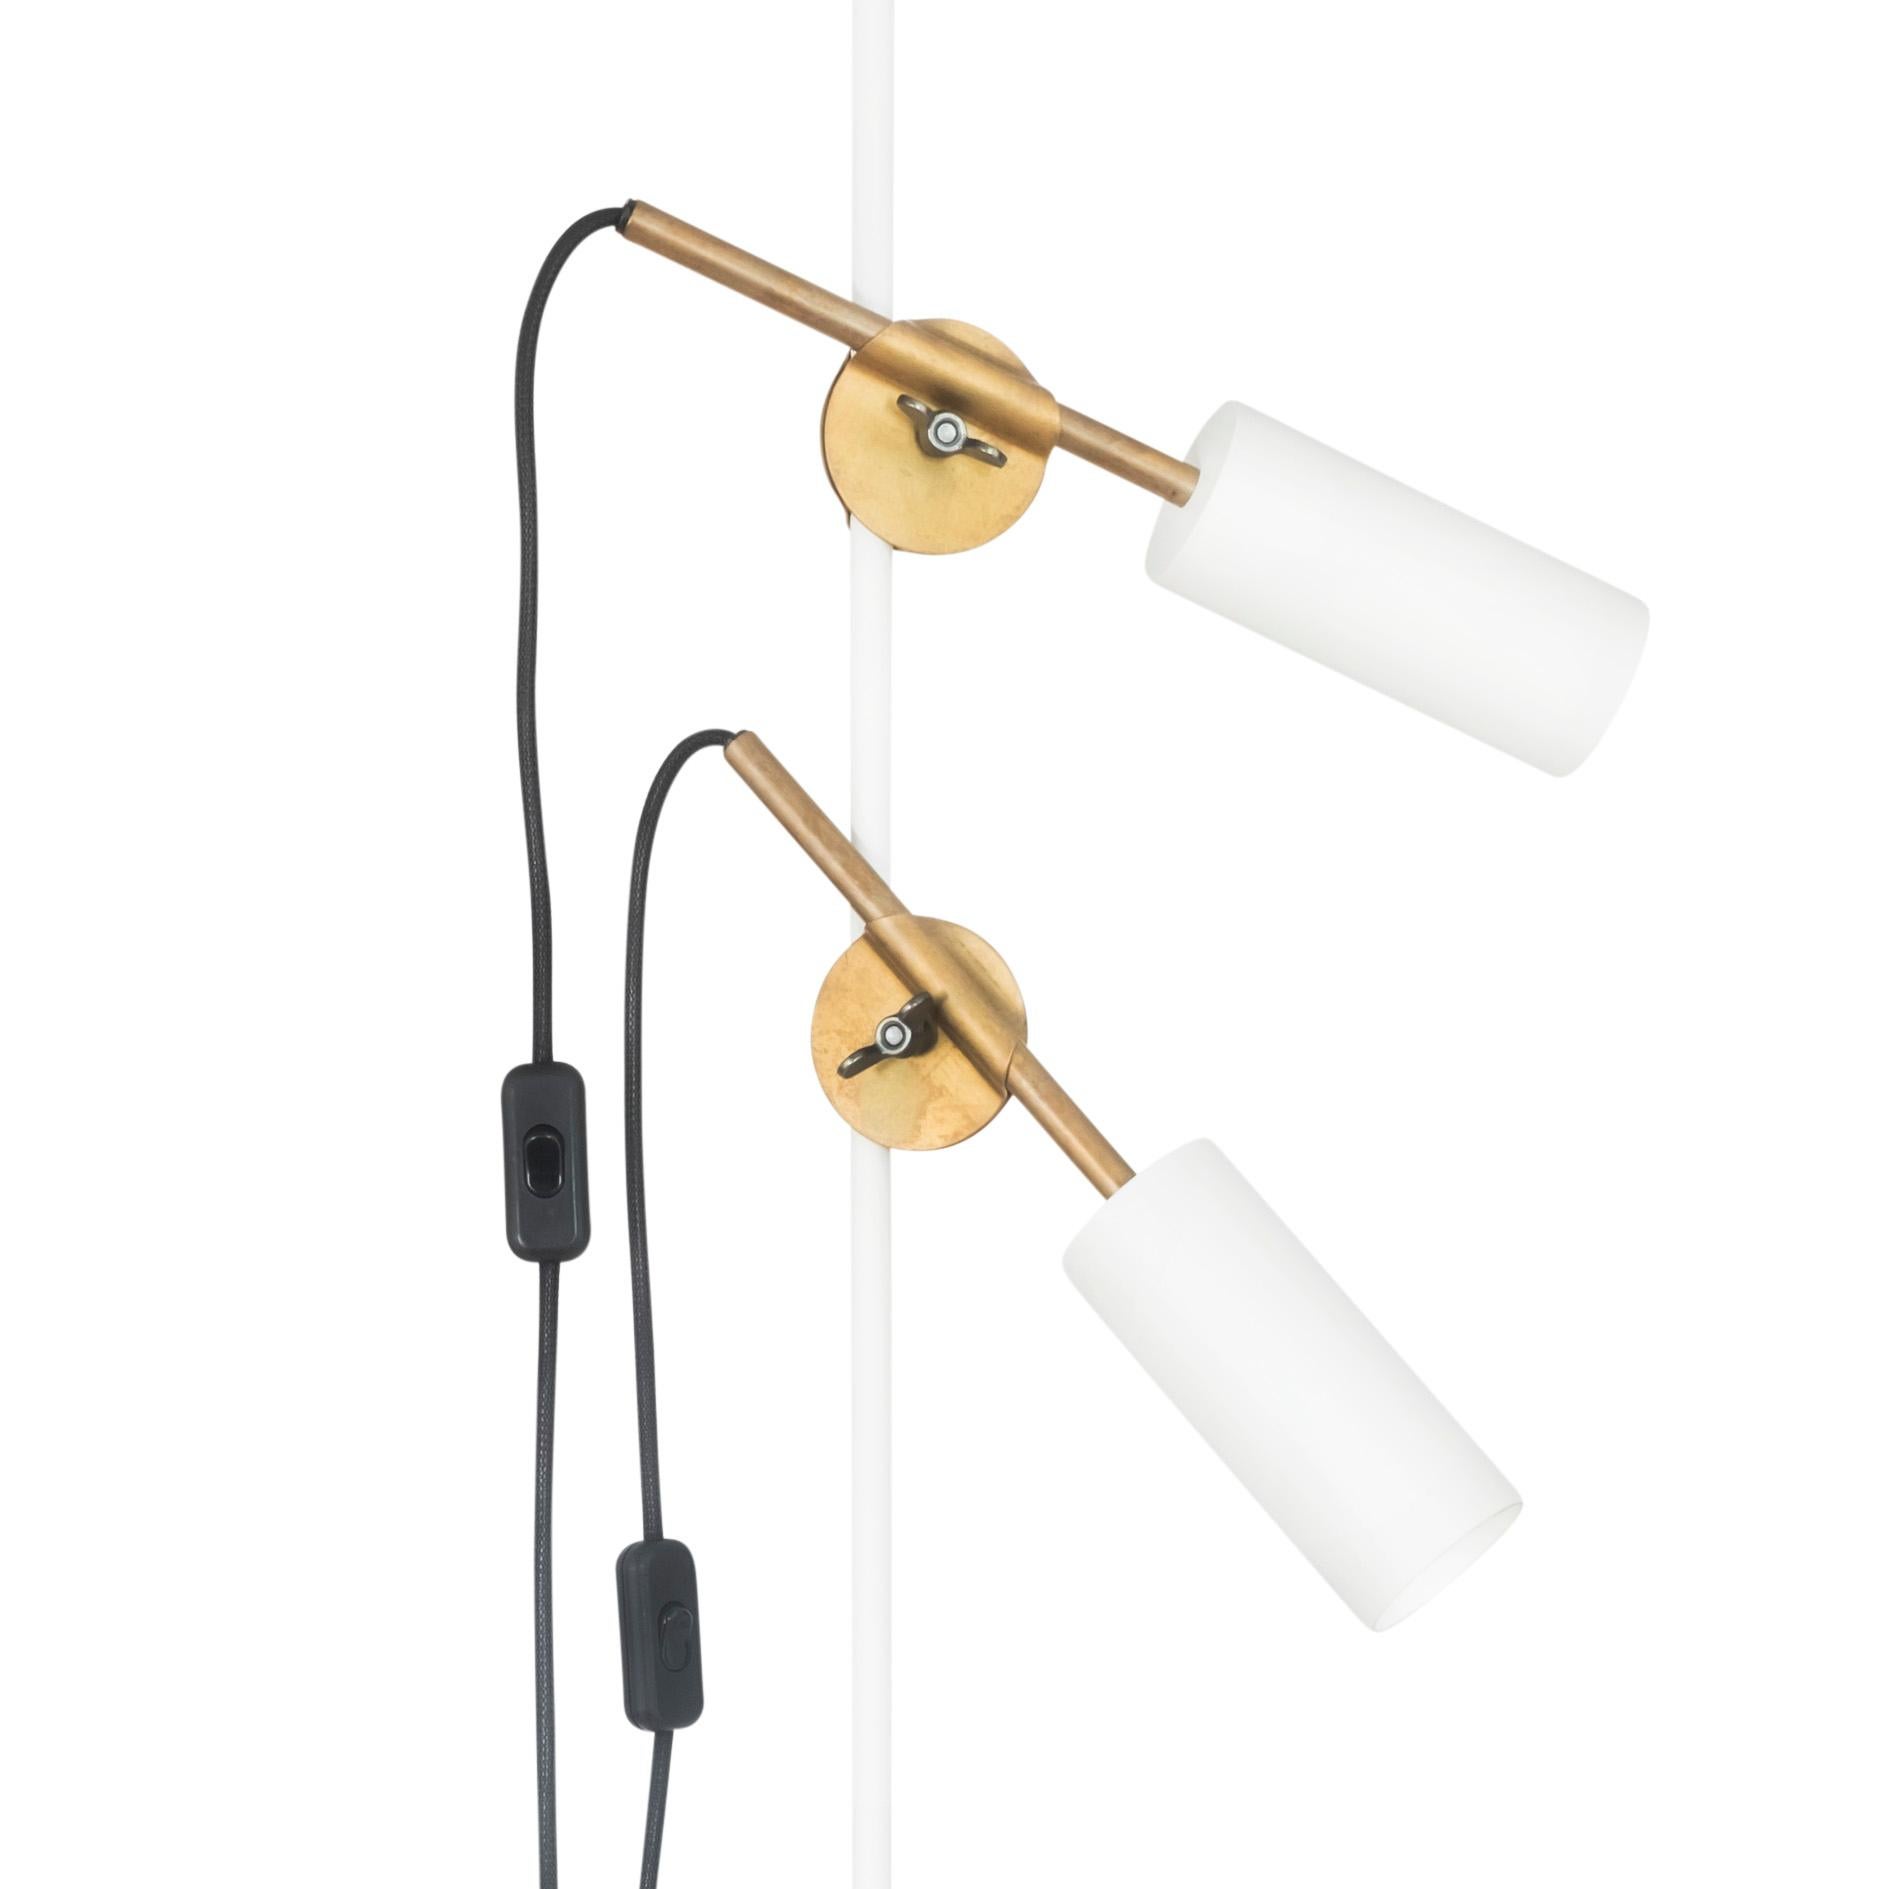 Johan Carpner STAV two arms floor lamp white brass by Konsthantverk and manufactured by Konsthantverk.

The production of lamps, wall lights and floor lamps are manufactured using craftsman’s techniques with the same materials and techniques as